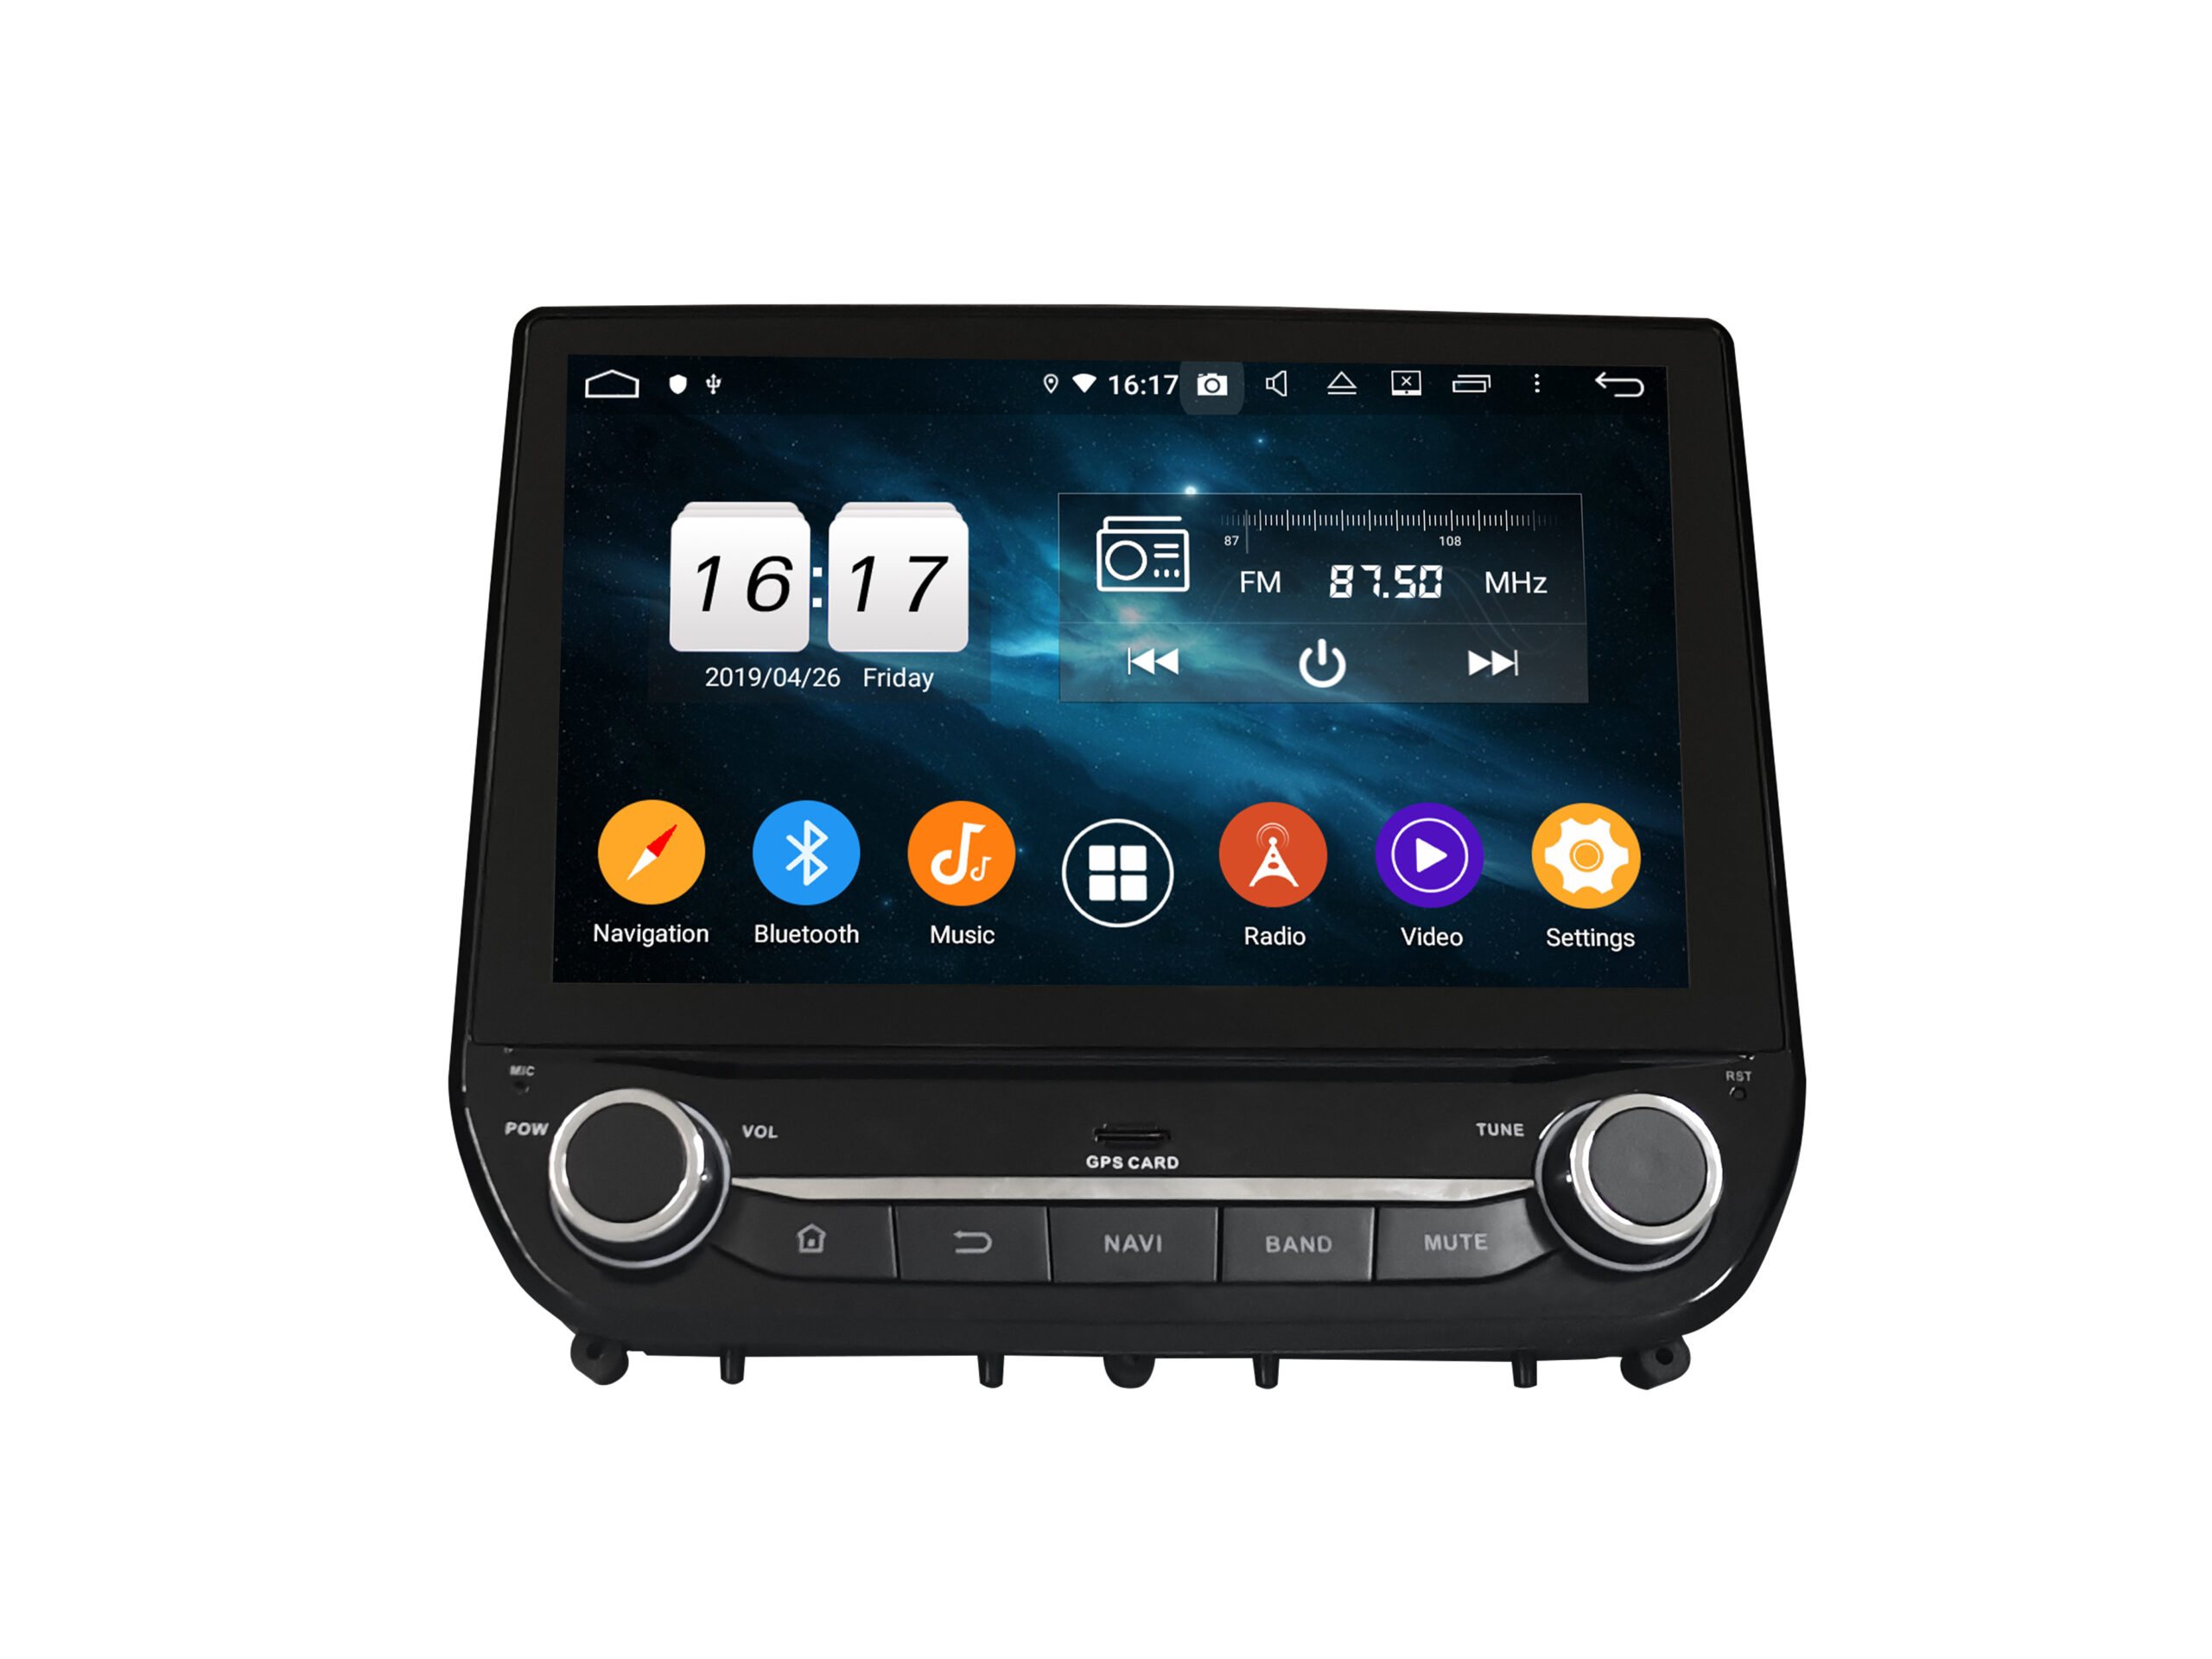 KD-9515 chinese android car stereo with bluetooth For Ford Ecosport / Fiesta